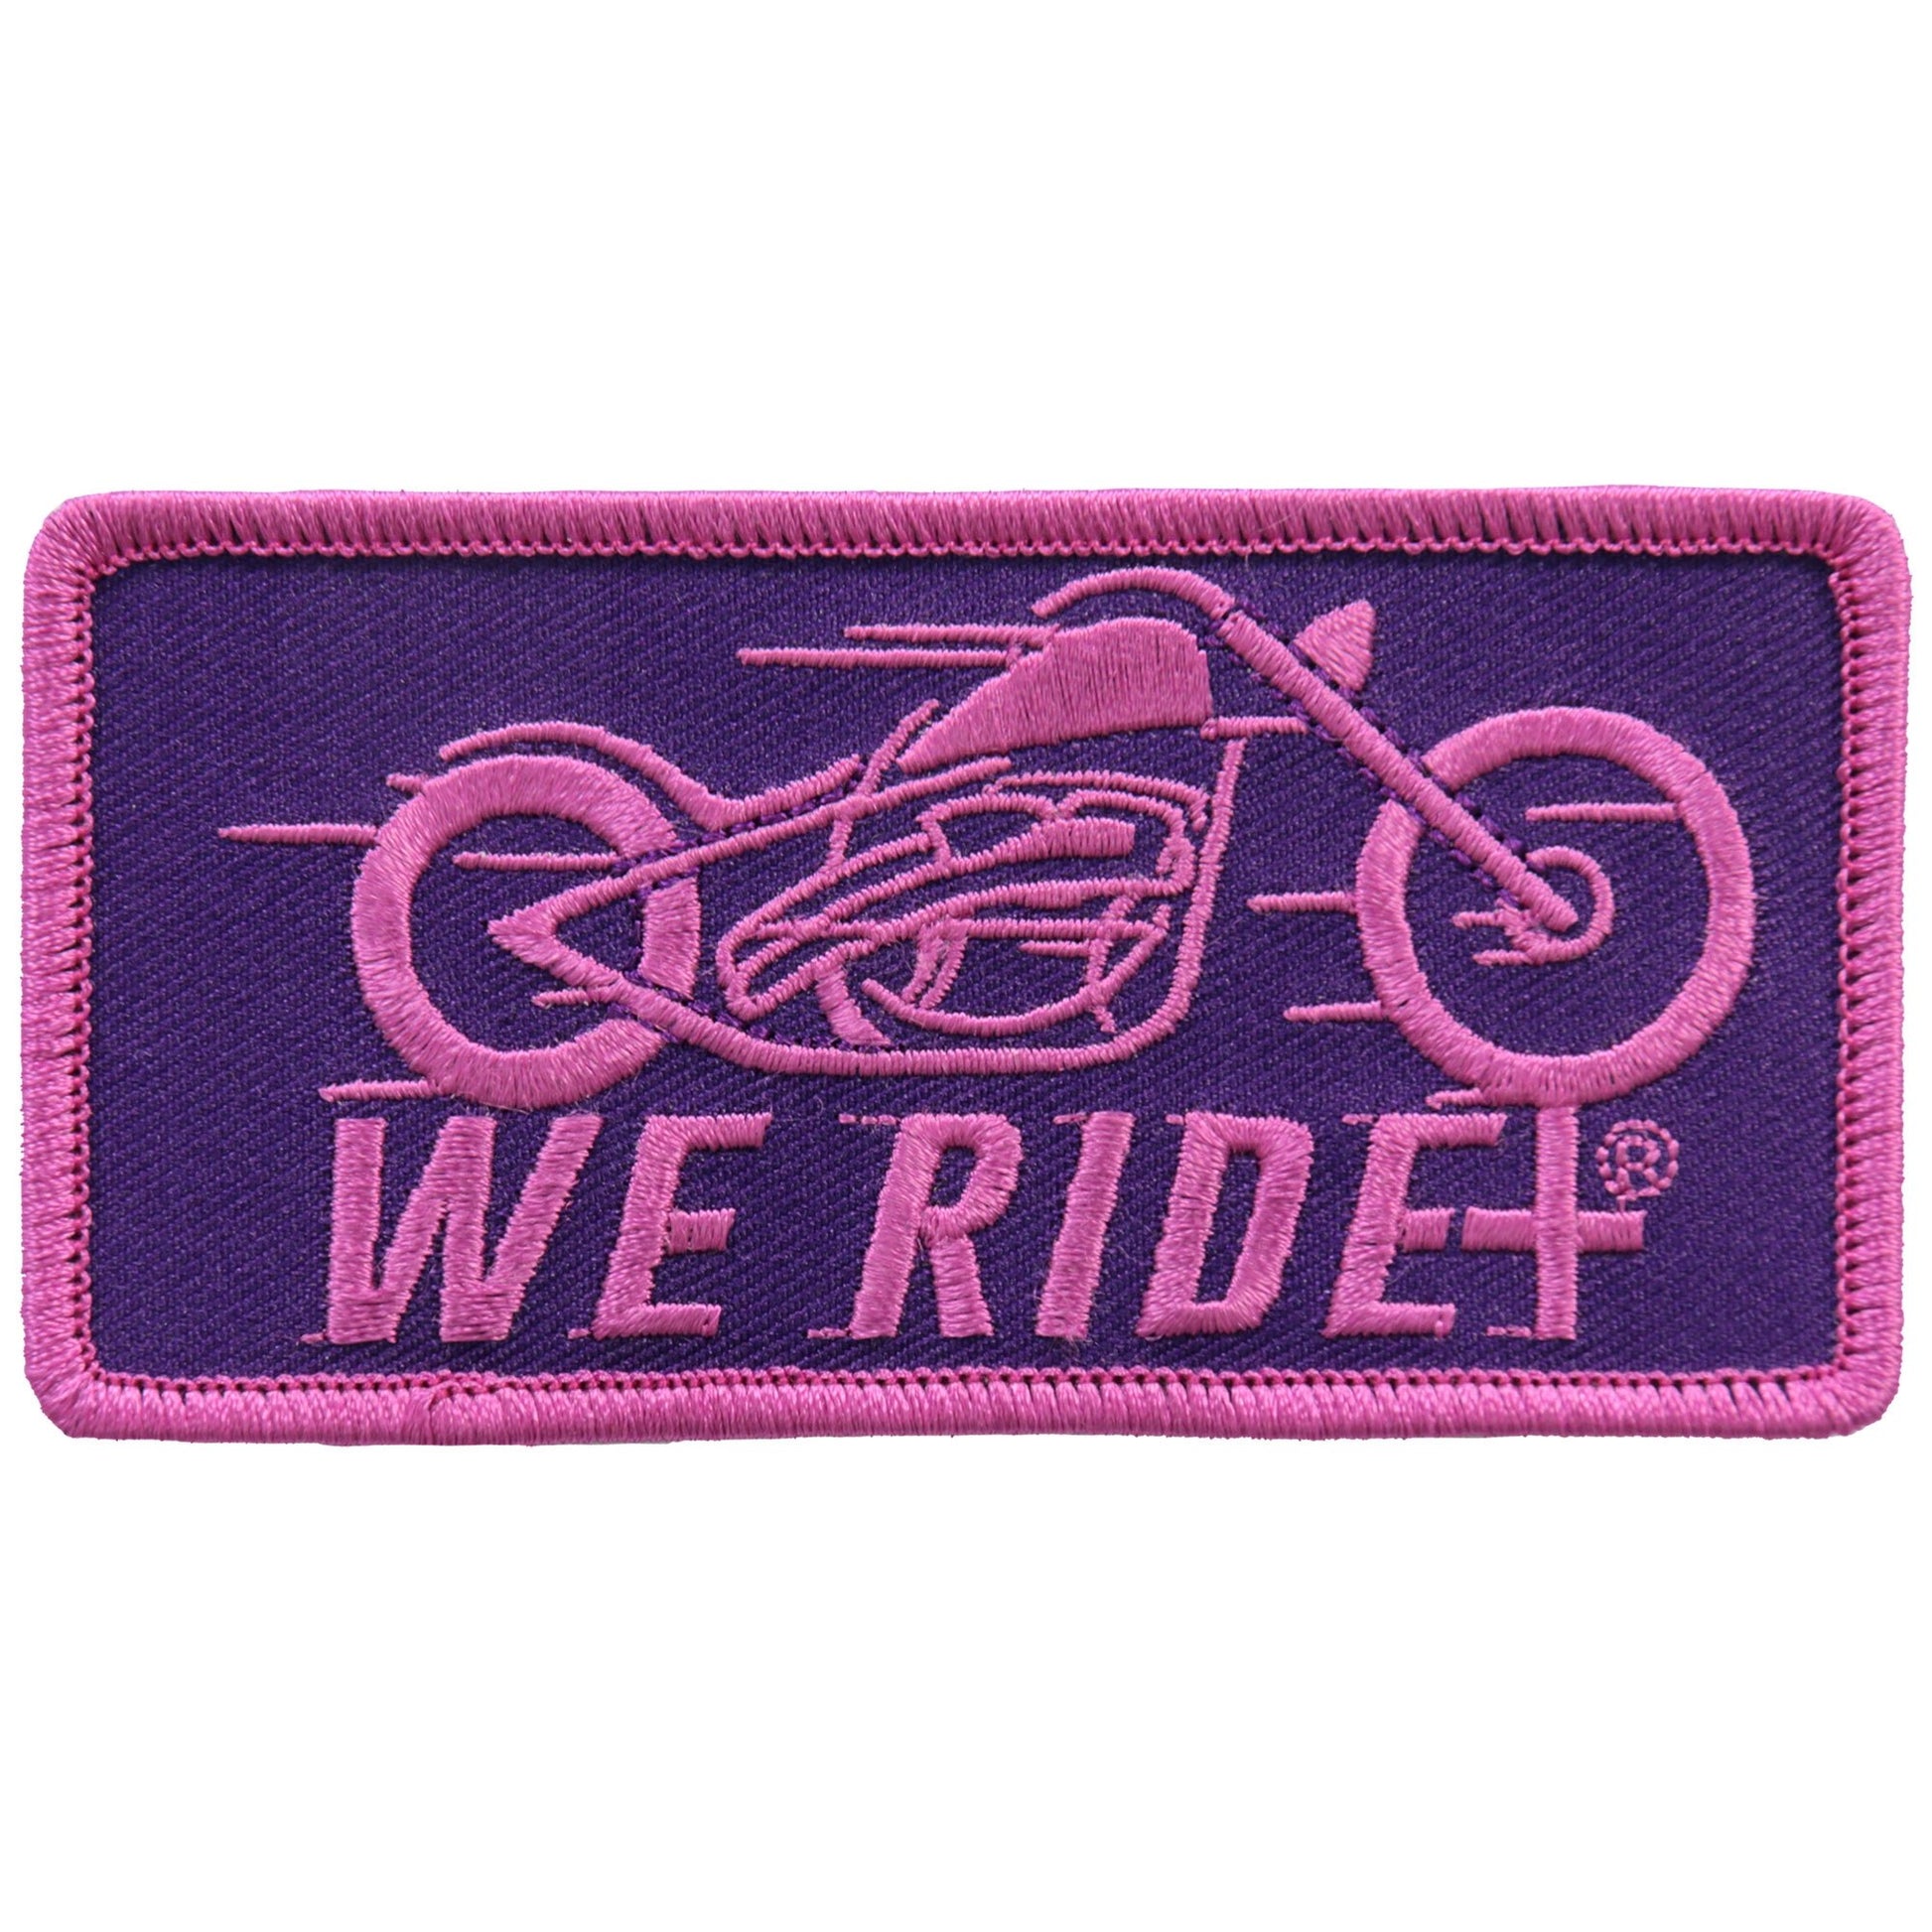 Hot Leathers PPL9748 4 Inch We Ride Pink Bike Patch